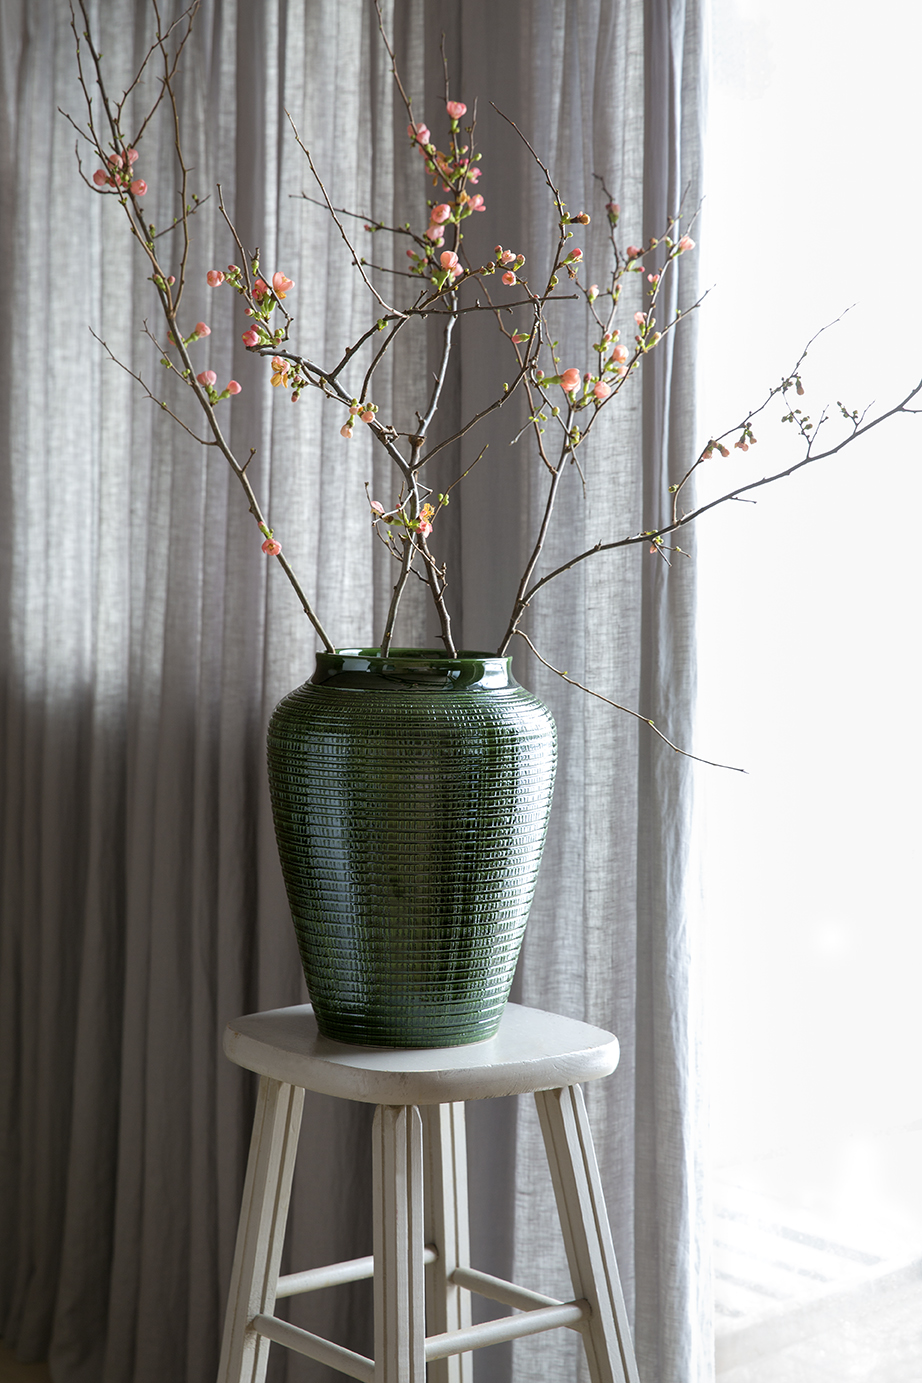 Large glazed green vase with branches on stool